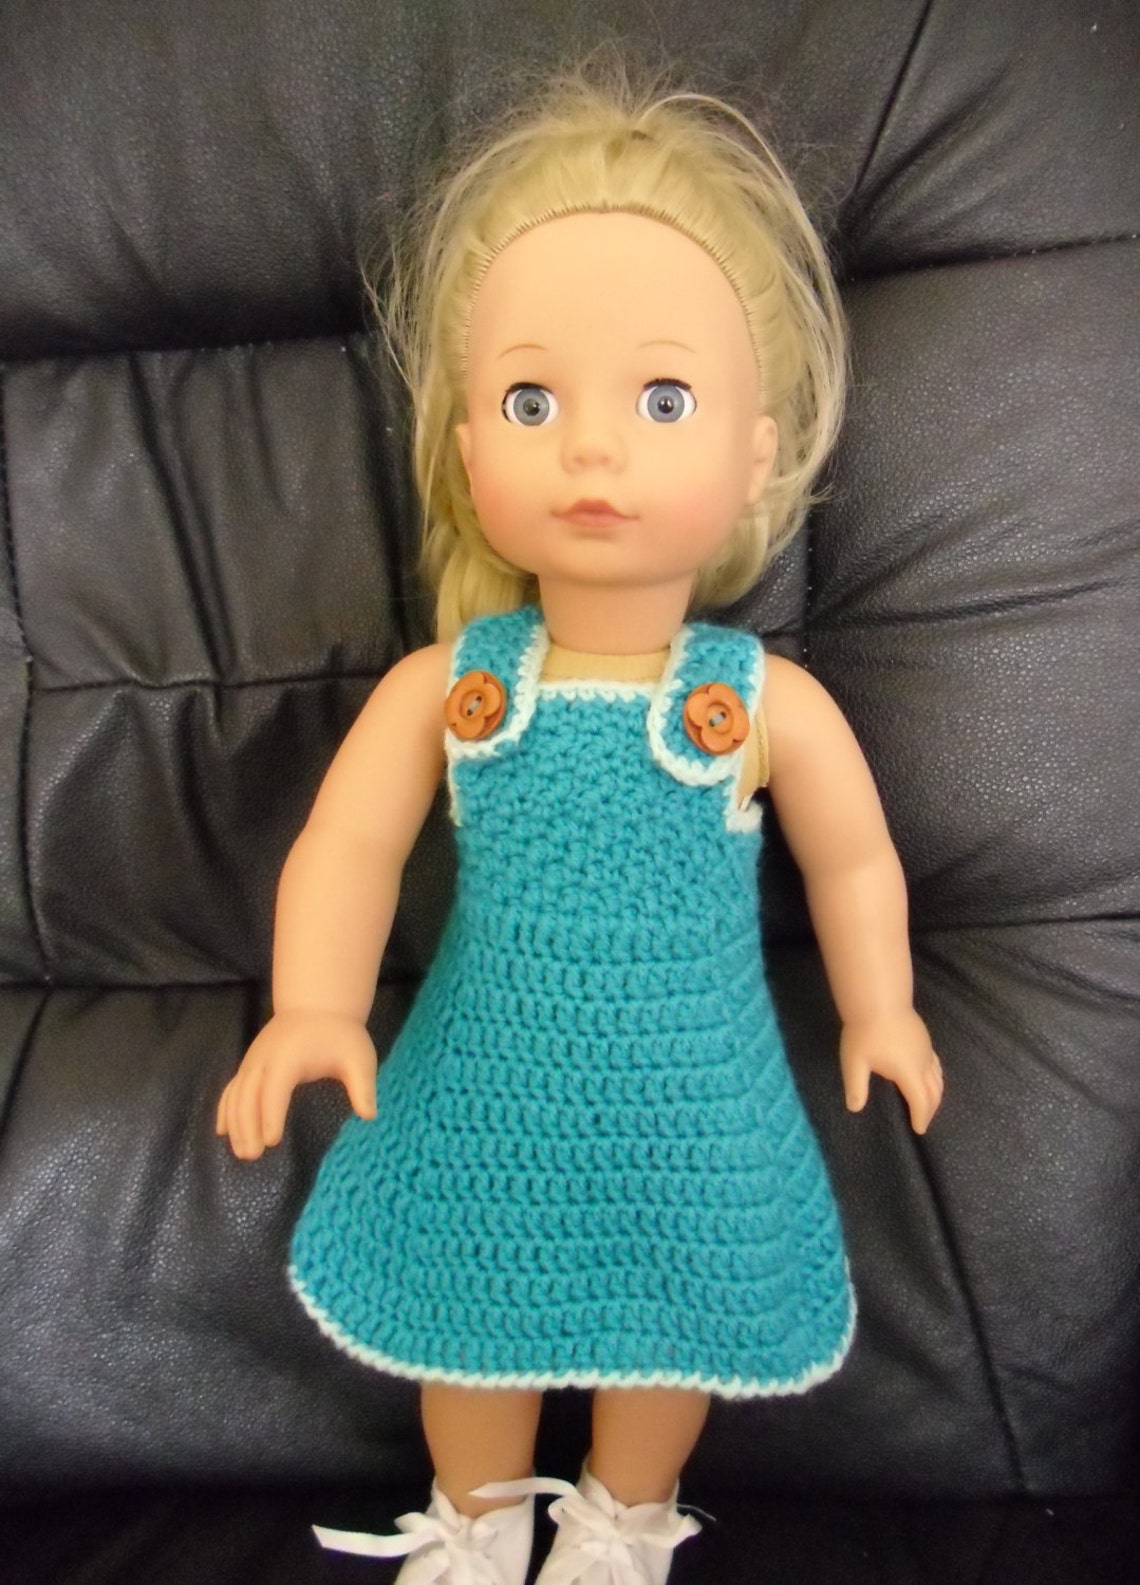 Crochet Pattern for Dress and Shawl for 18 Inch Doll - Etsy